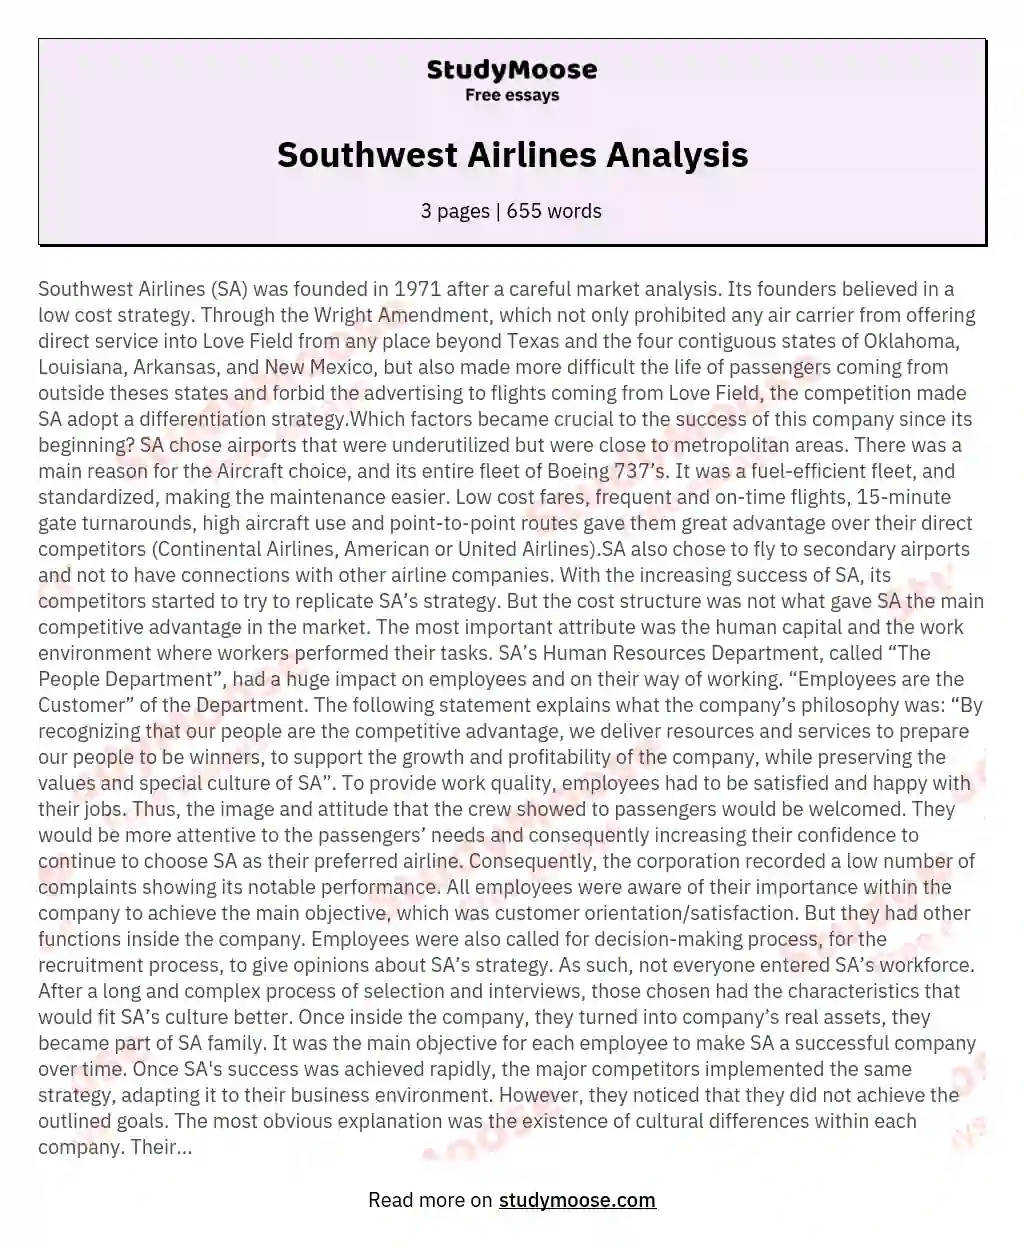 Southwest Airlines Analysis essay